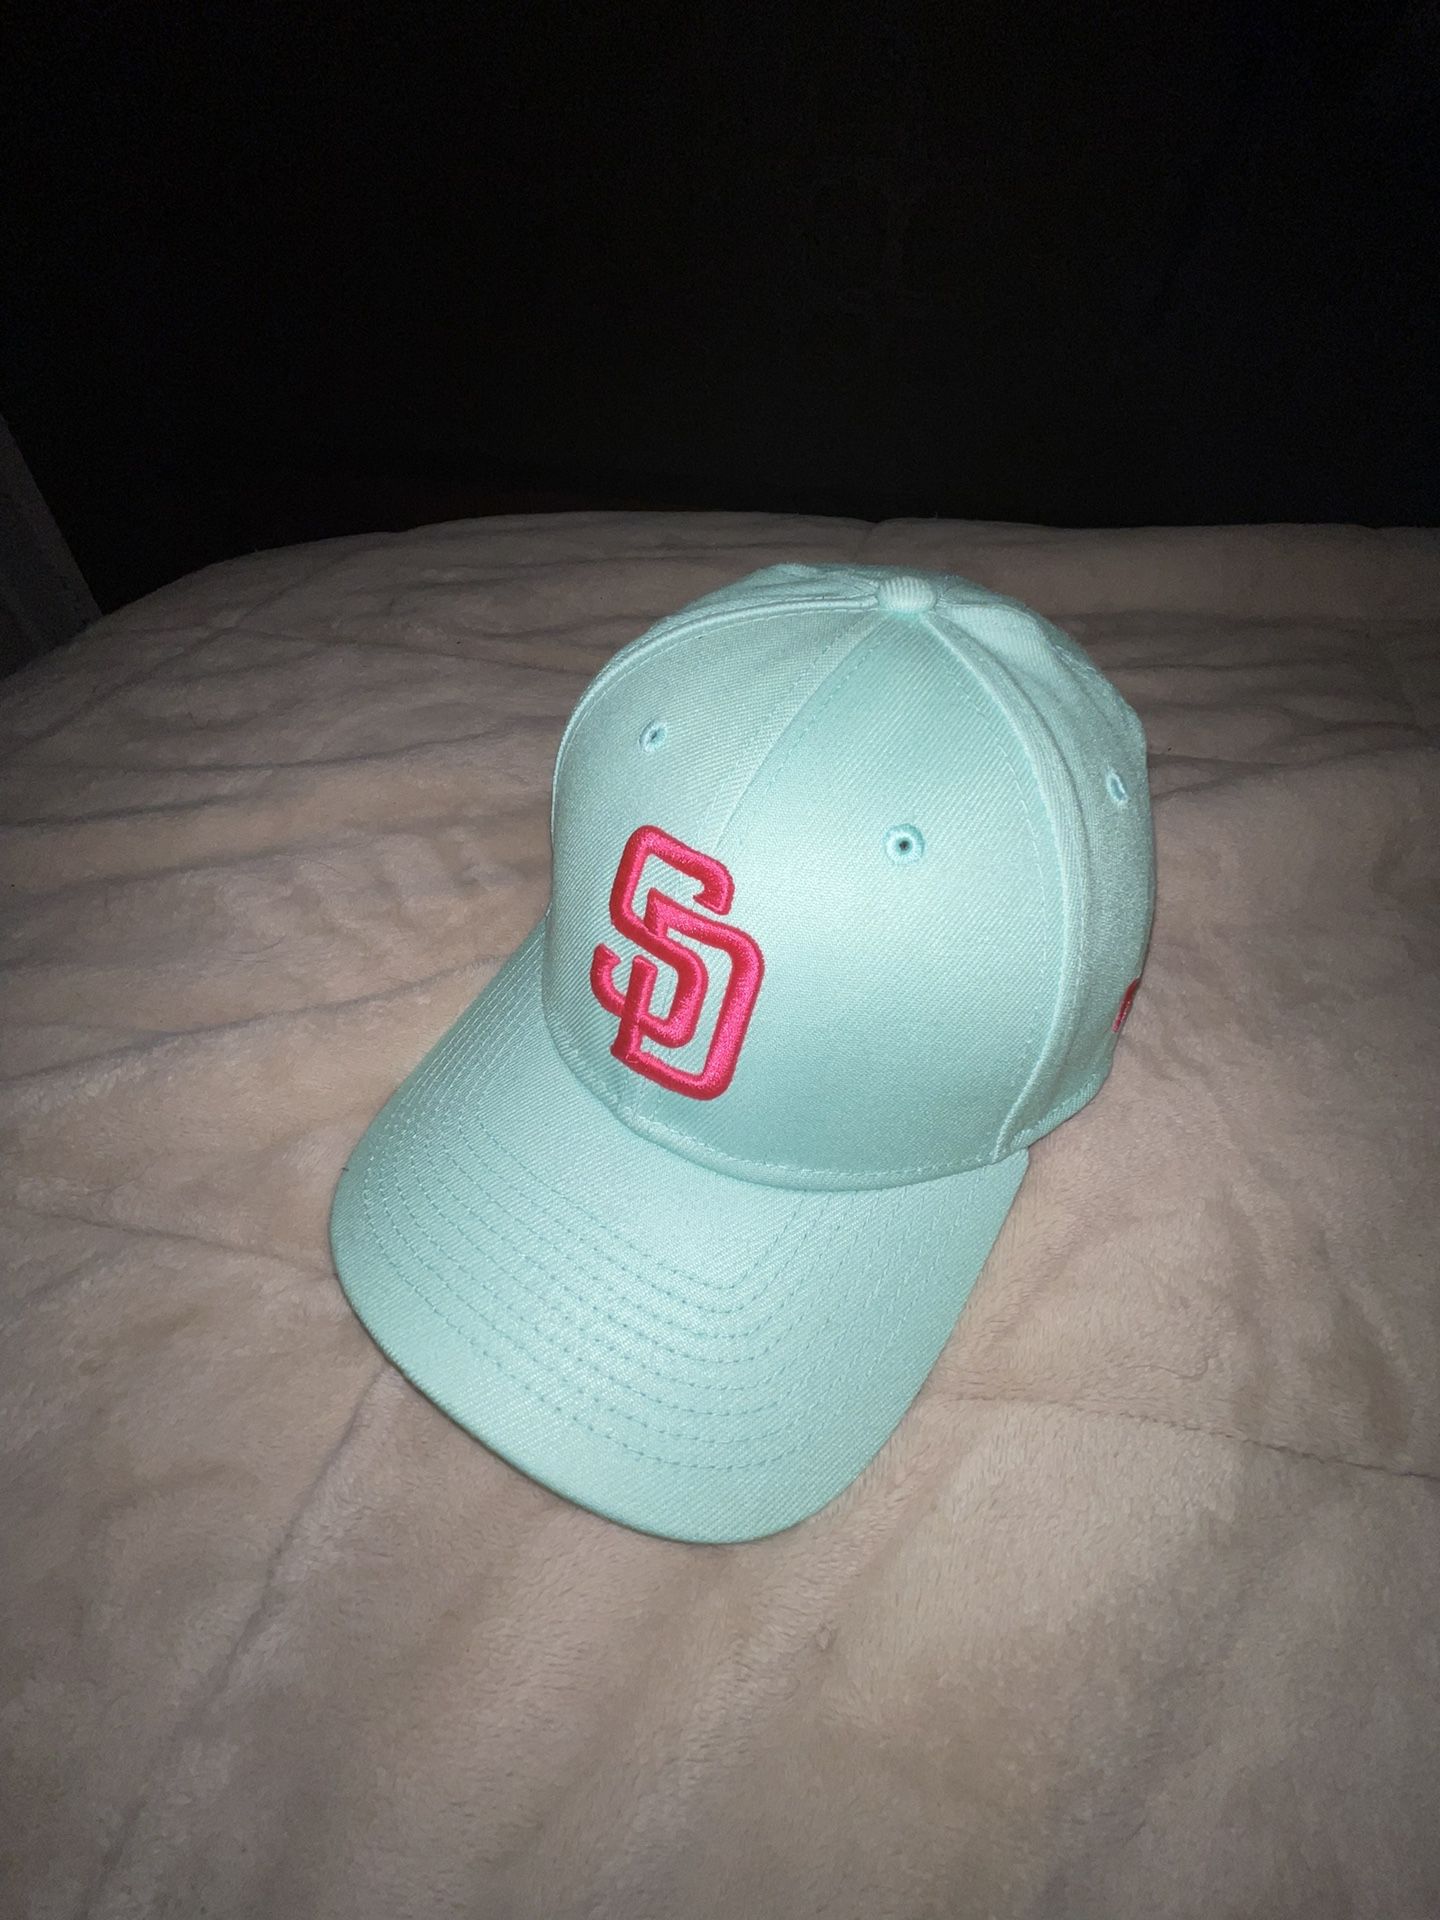 padres connect hat